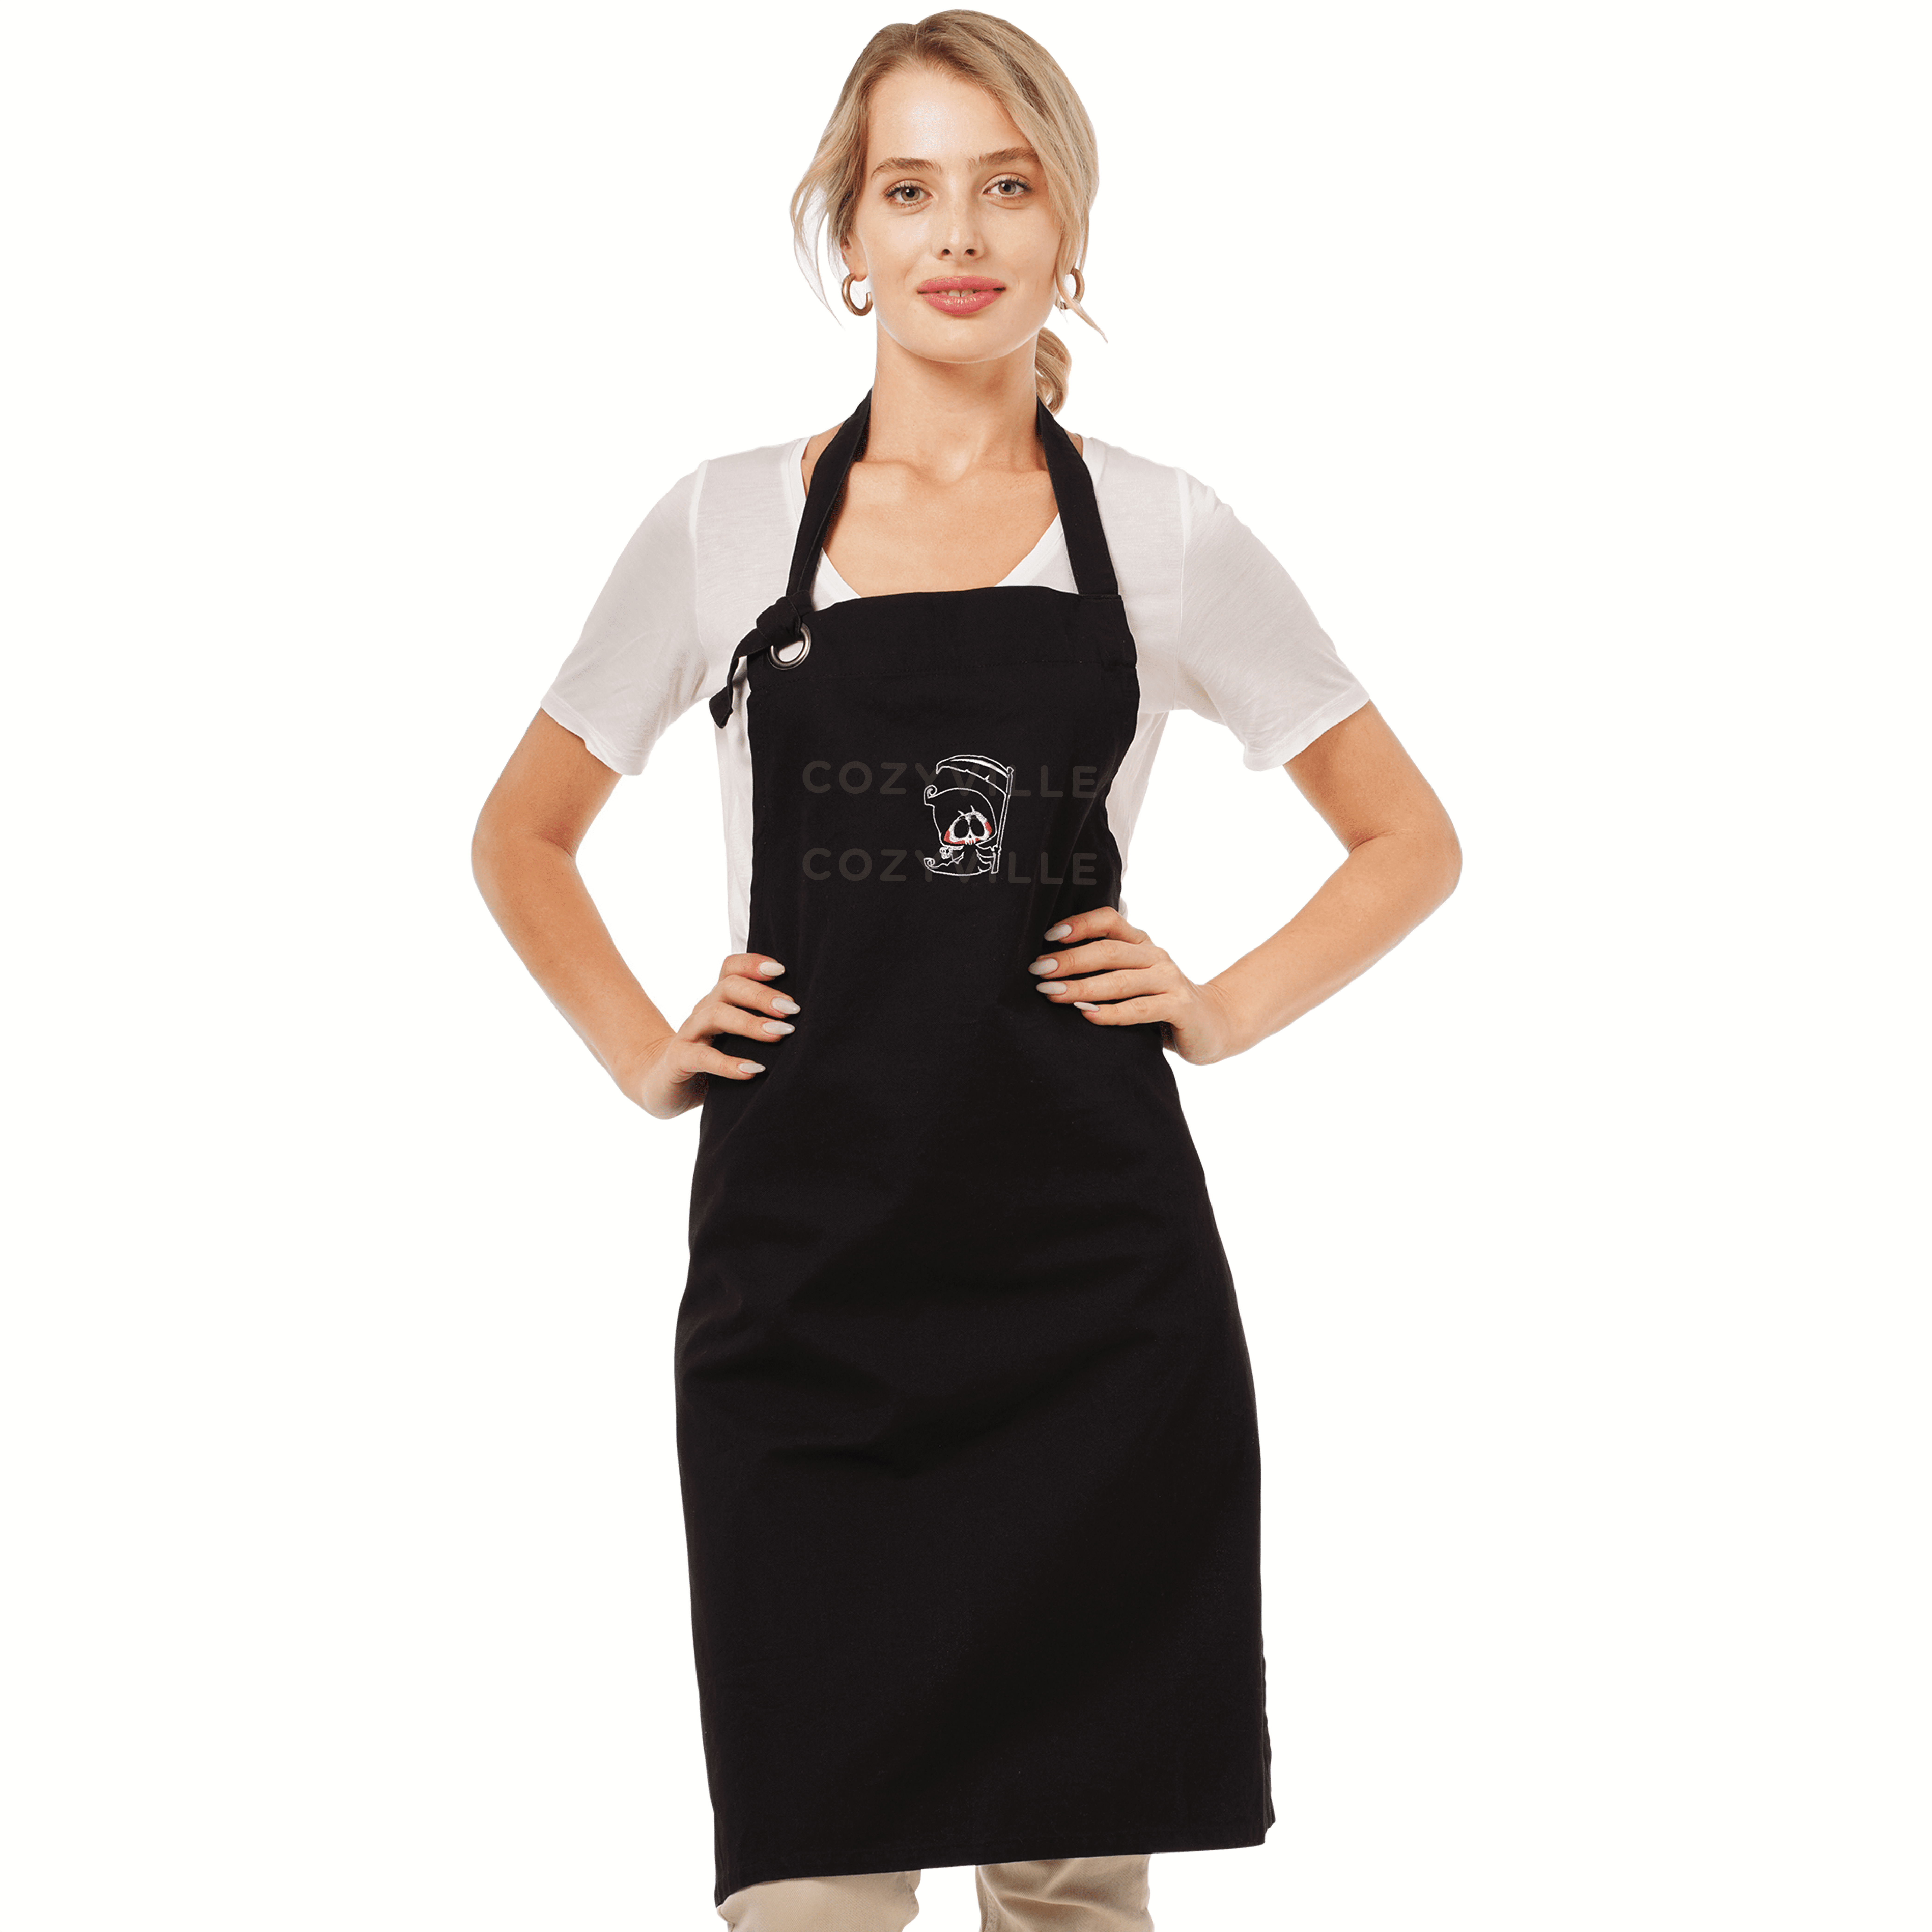 Cooking Kitchen Apron For Women Men Chef Protect from Food Stains Black Apron